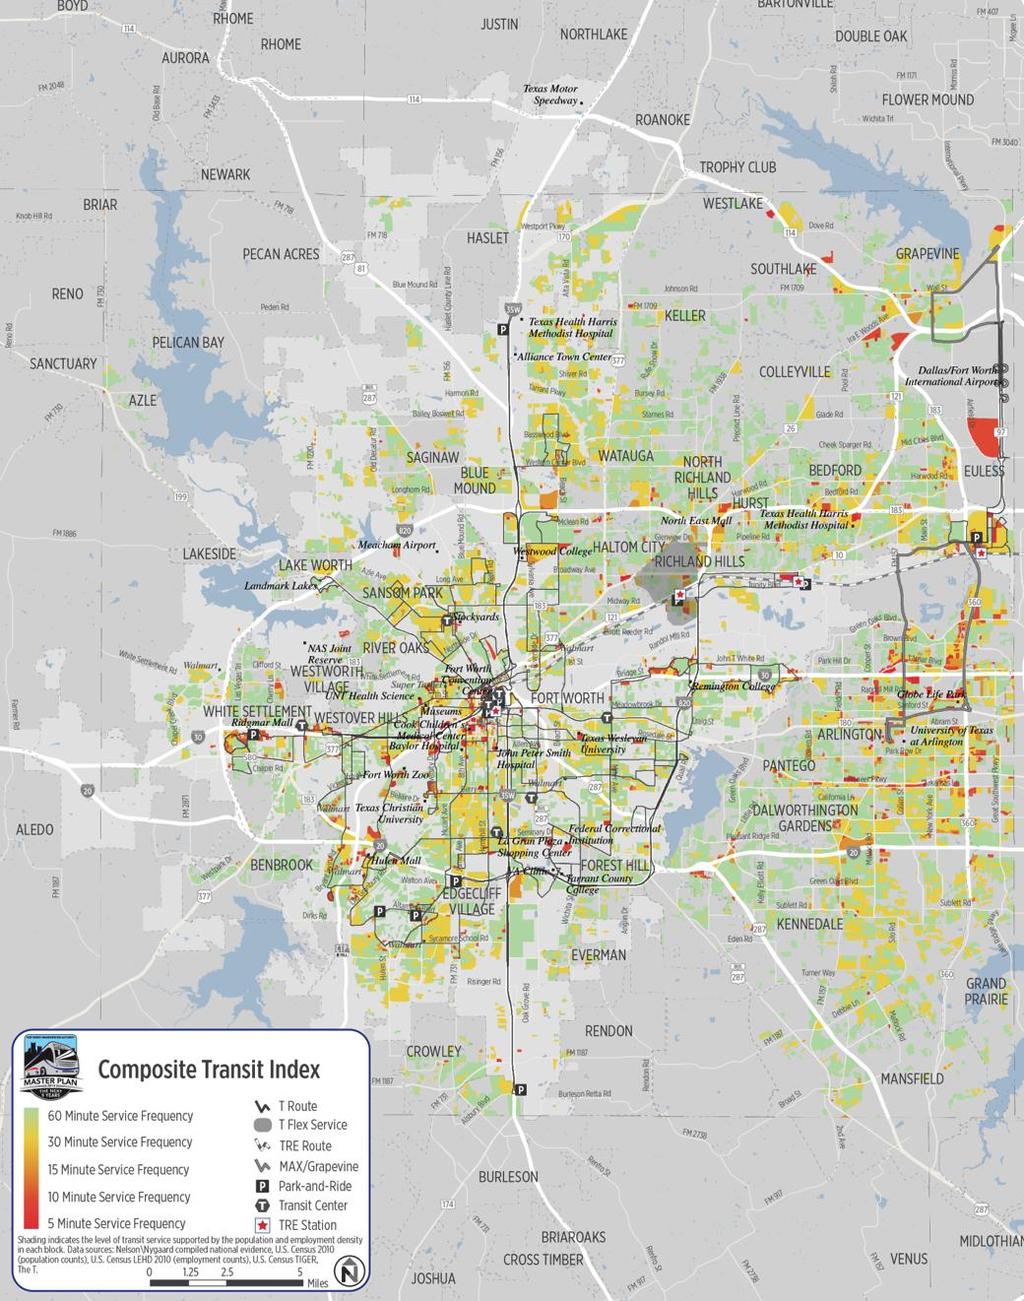 Note: These maps indicate underlying transit demand on a block